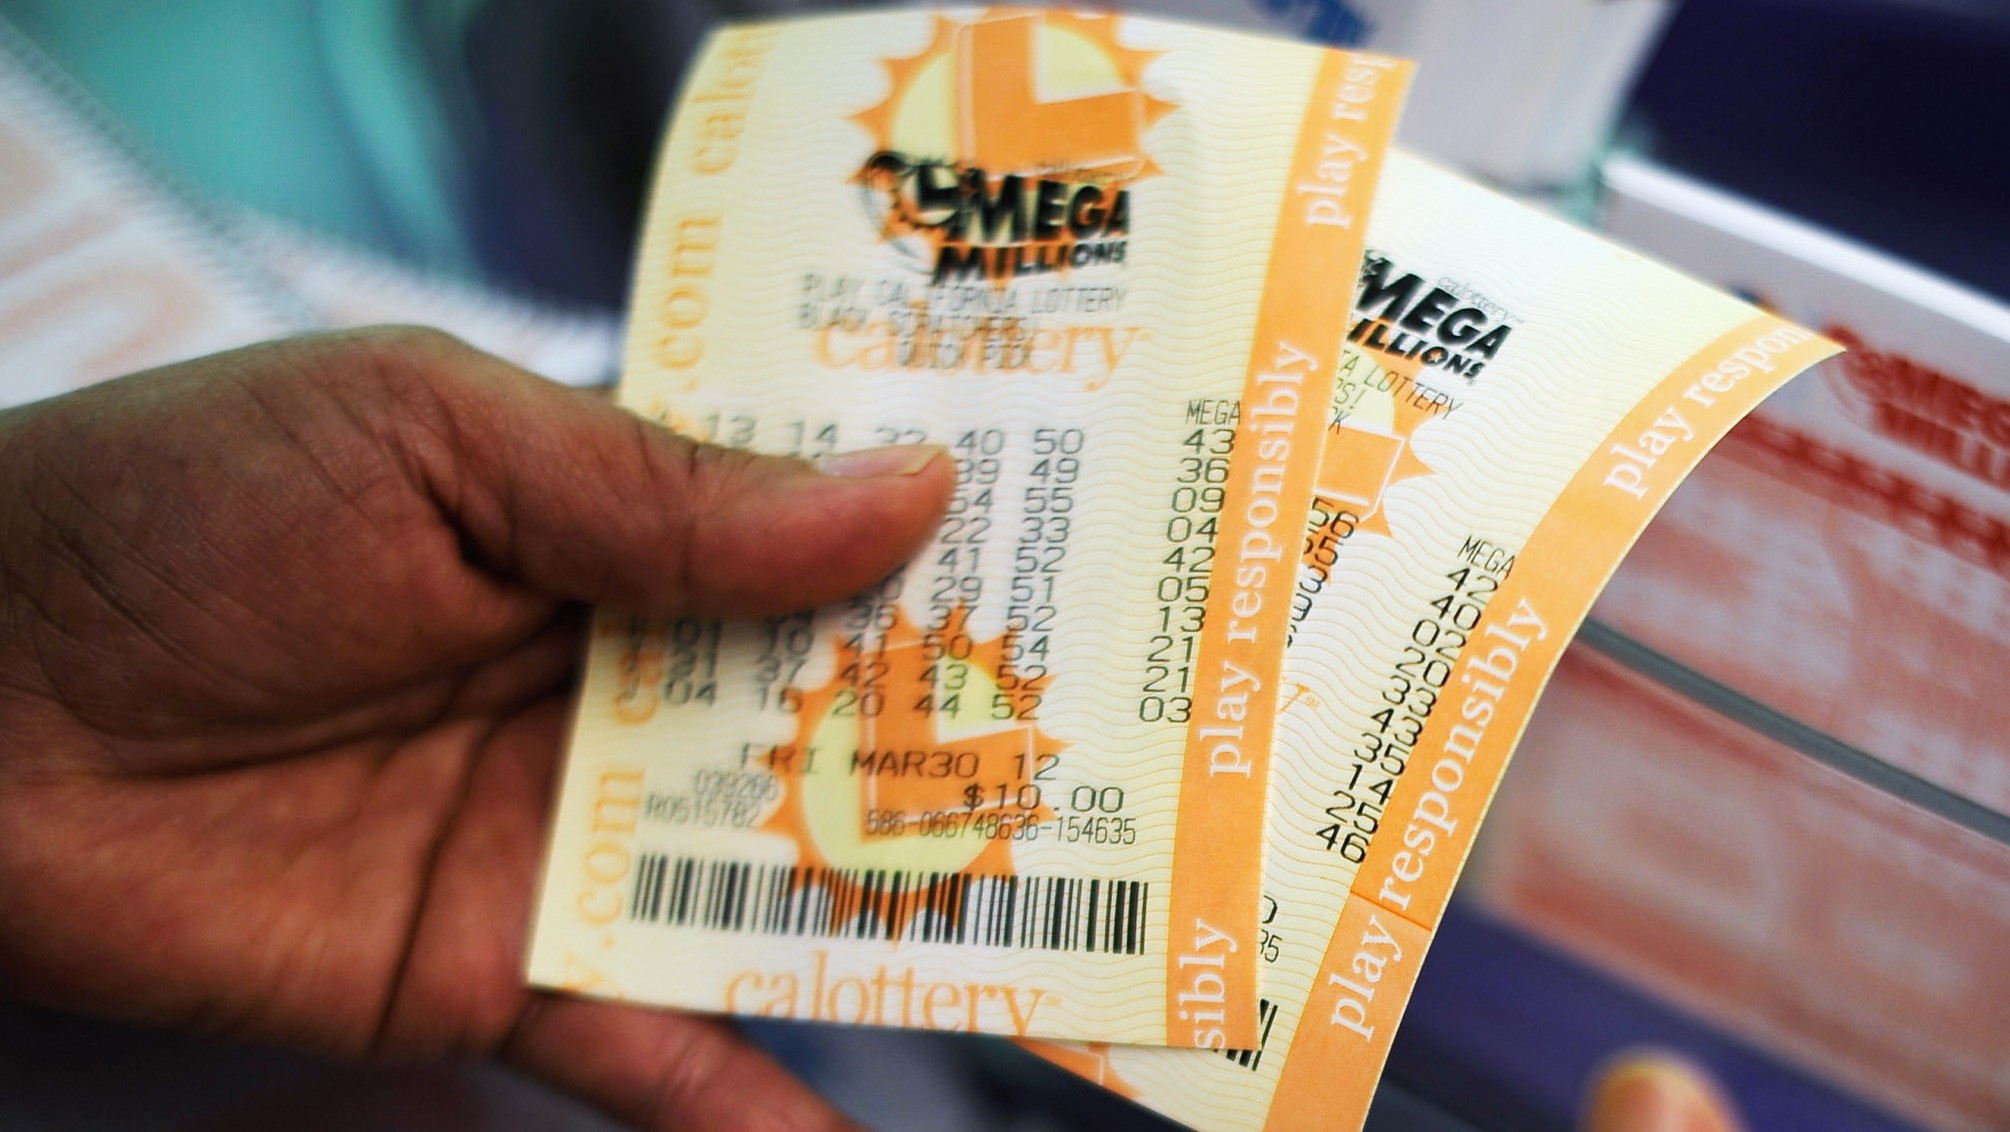 What Are the Mega Millions Winning Numbers for March 15?